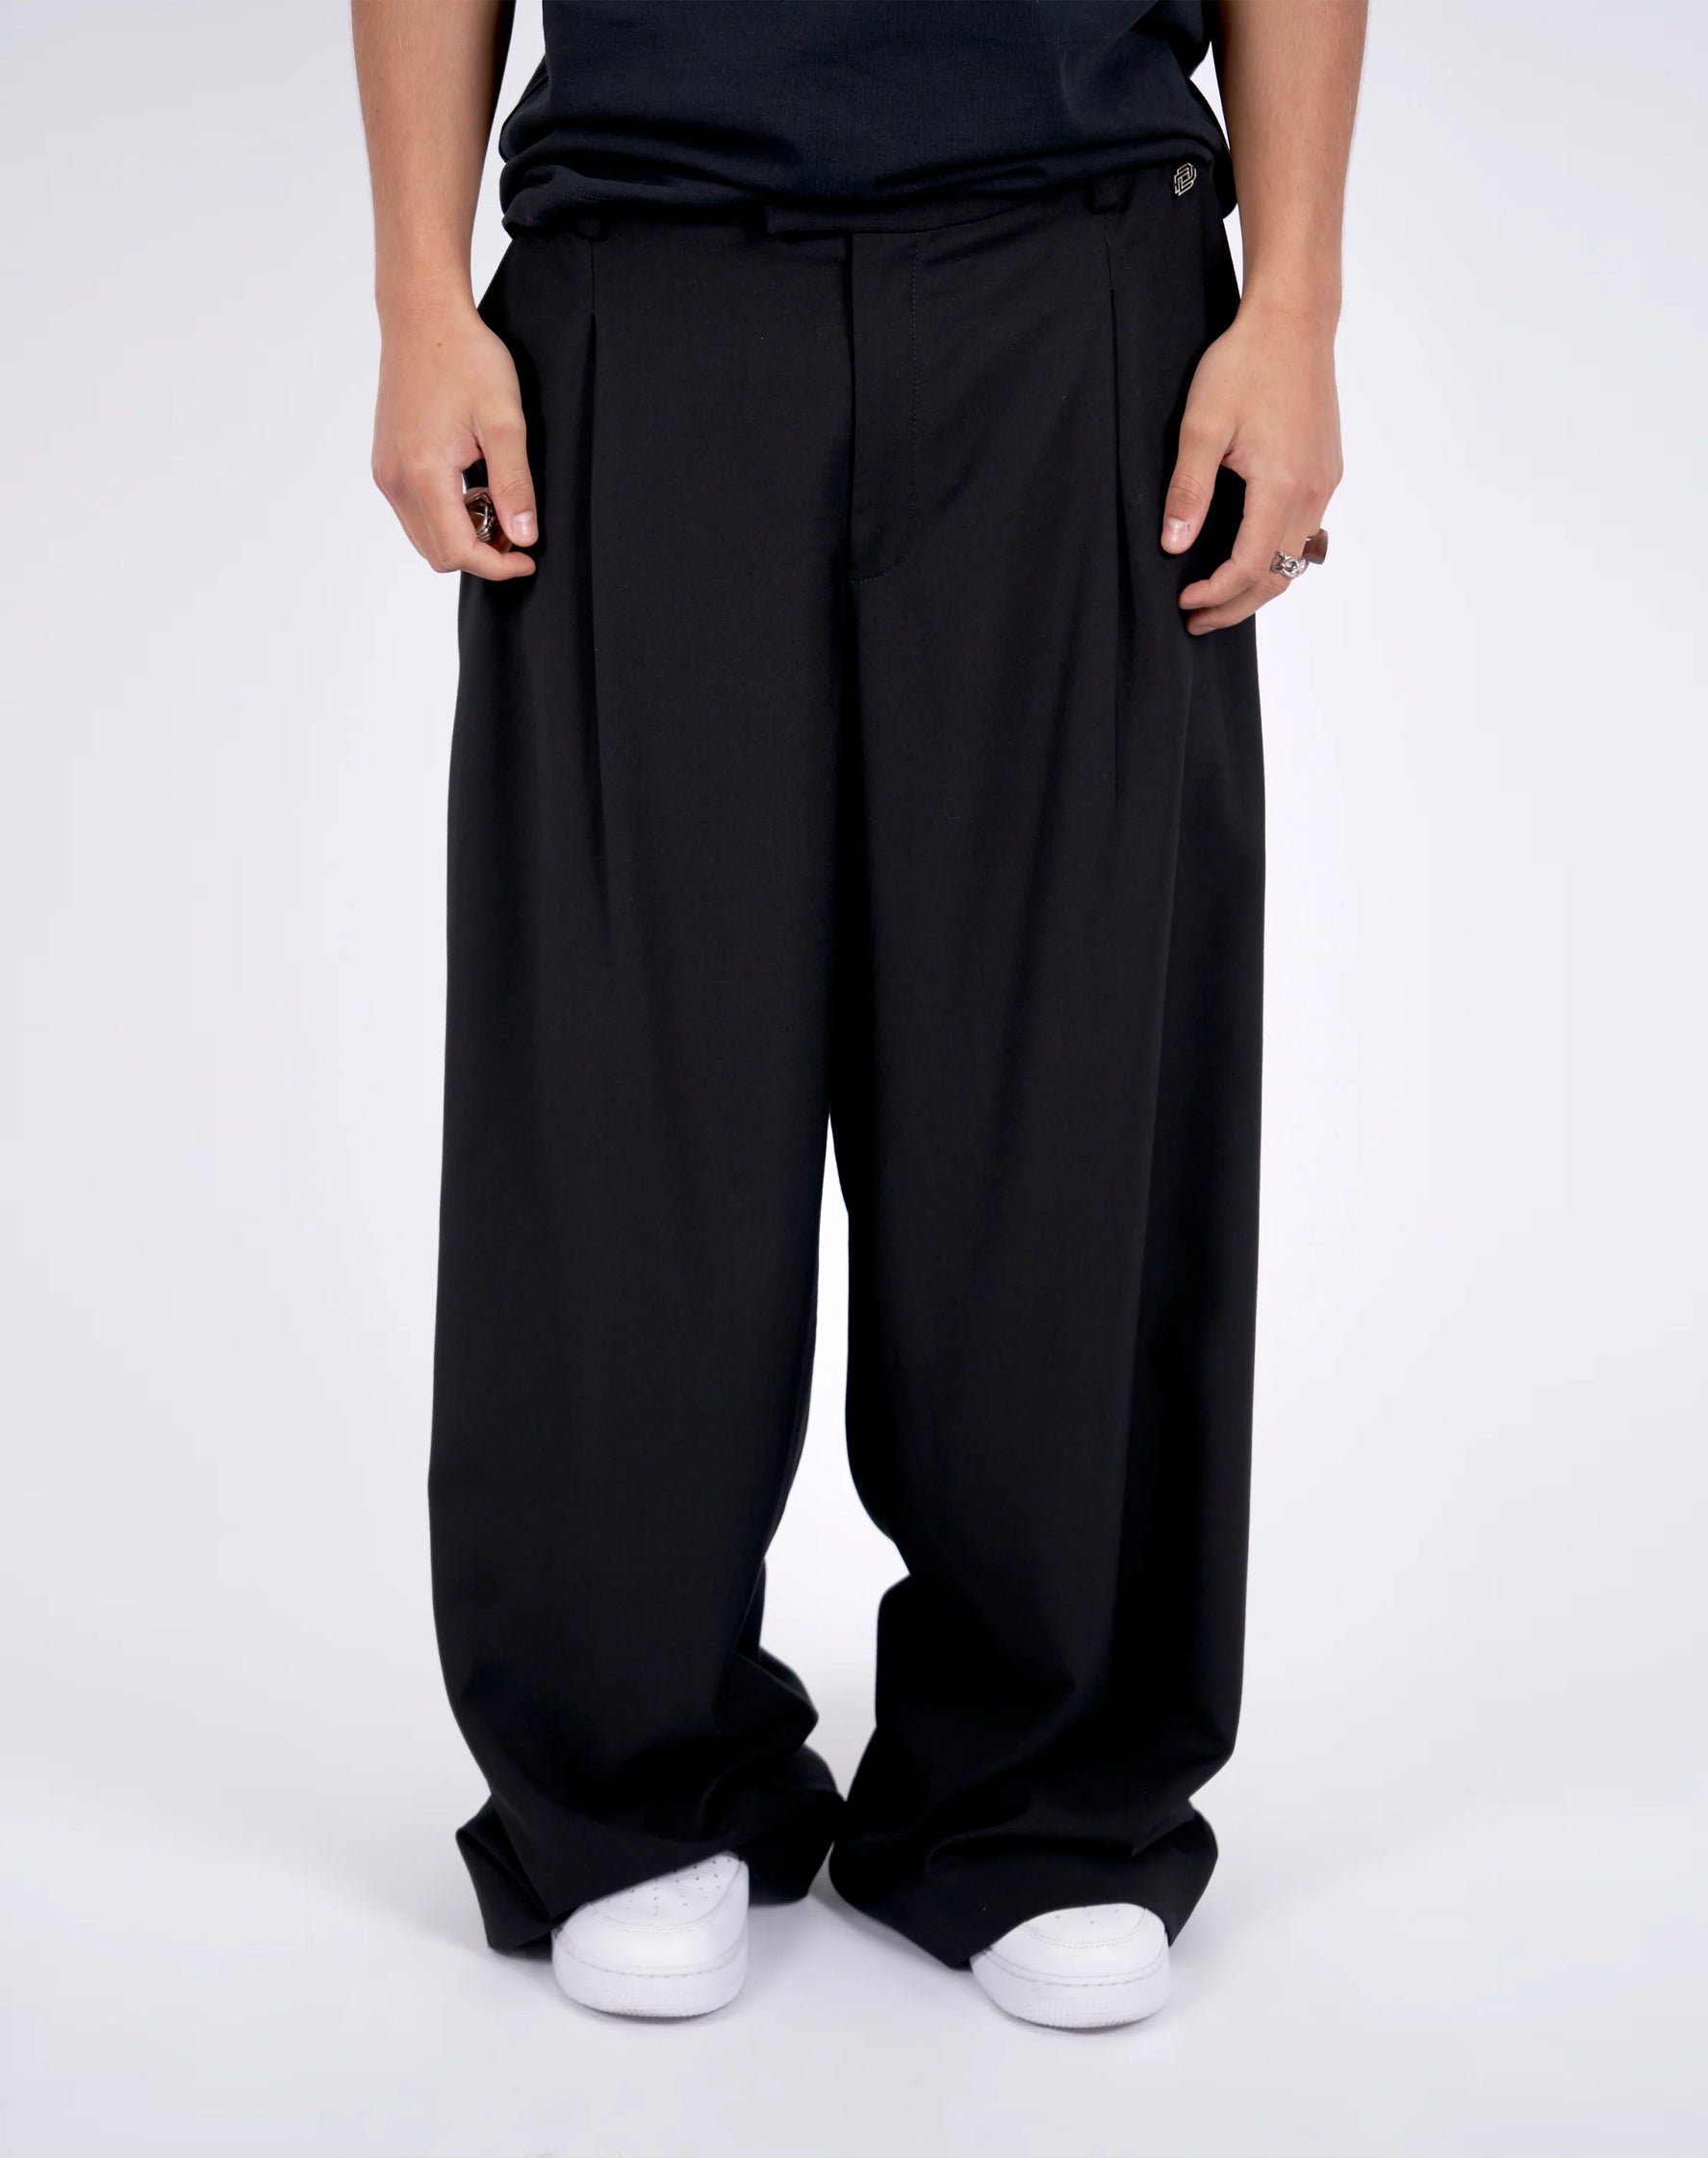 Black Wide Leg Pleated Trouser - Due Diligence Apparel